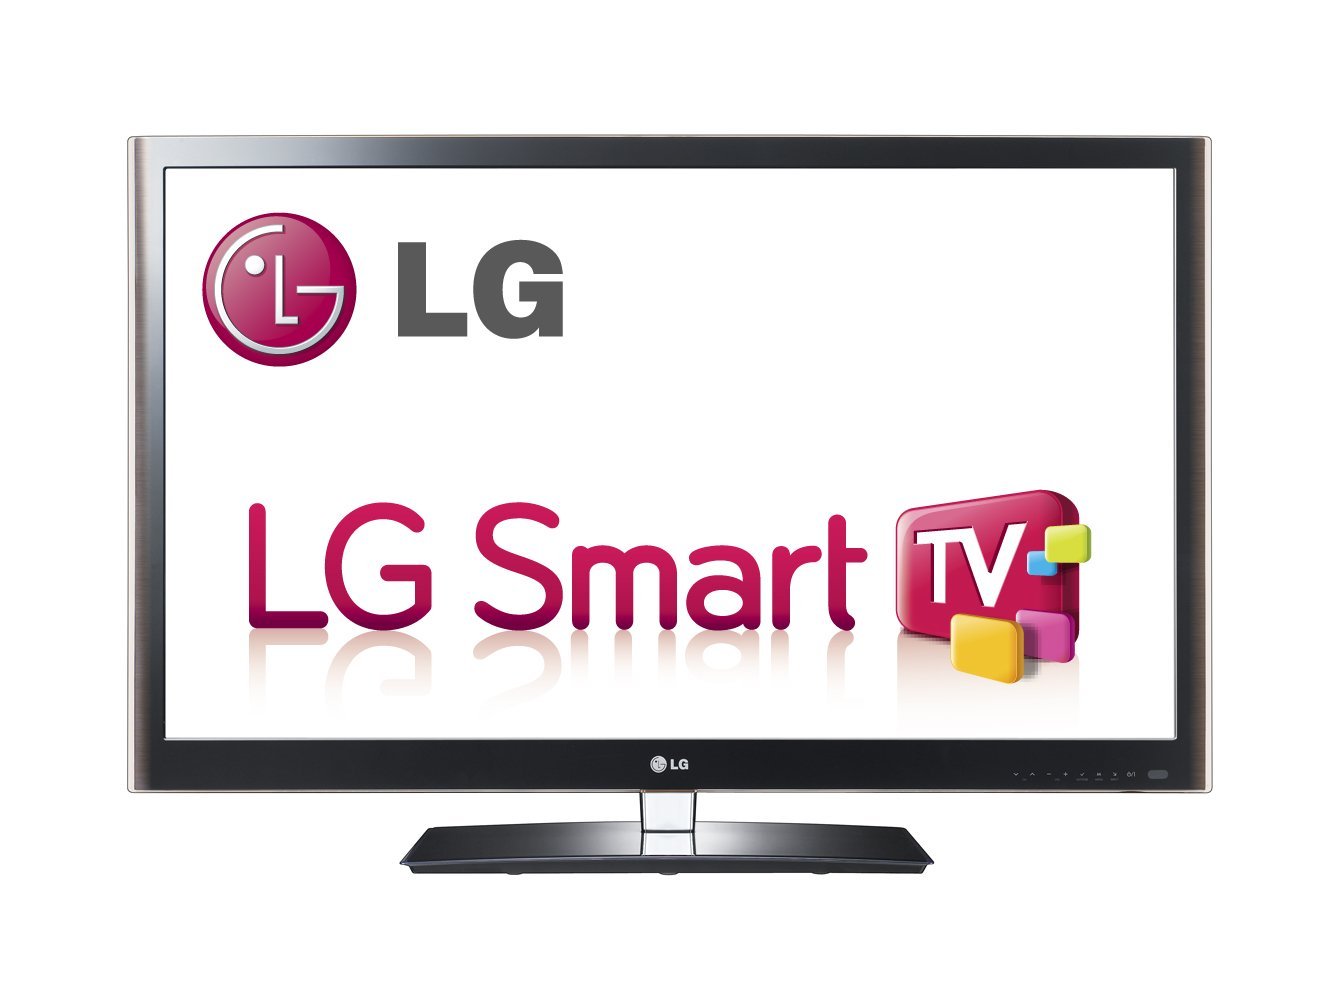 LG Smart TV's get access to Google Play Movies & TV in ...
